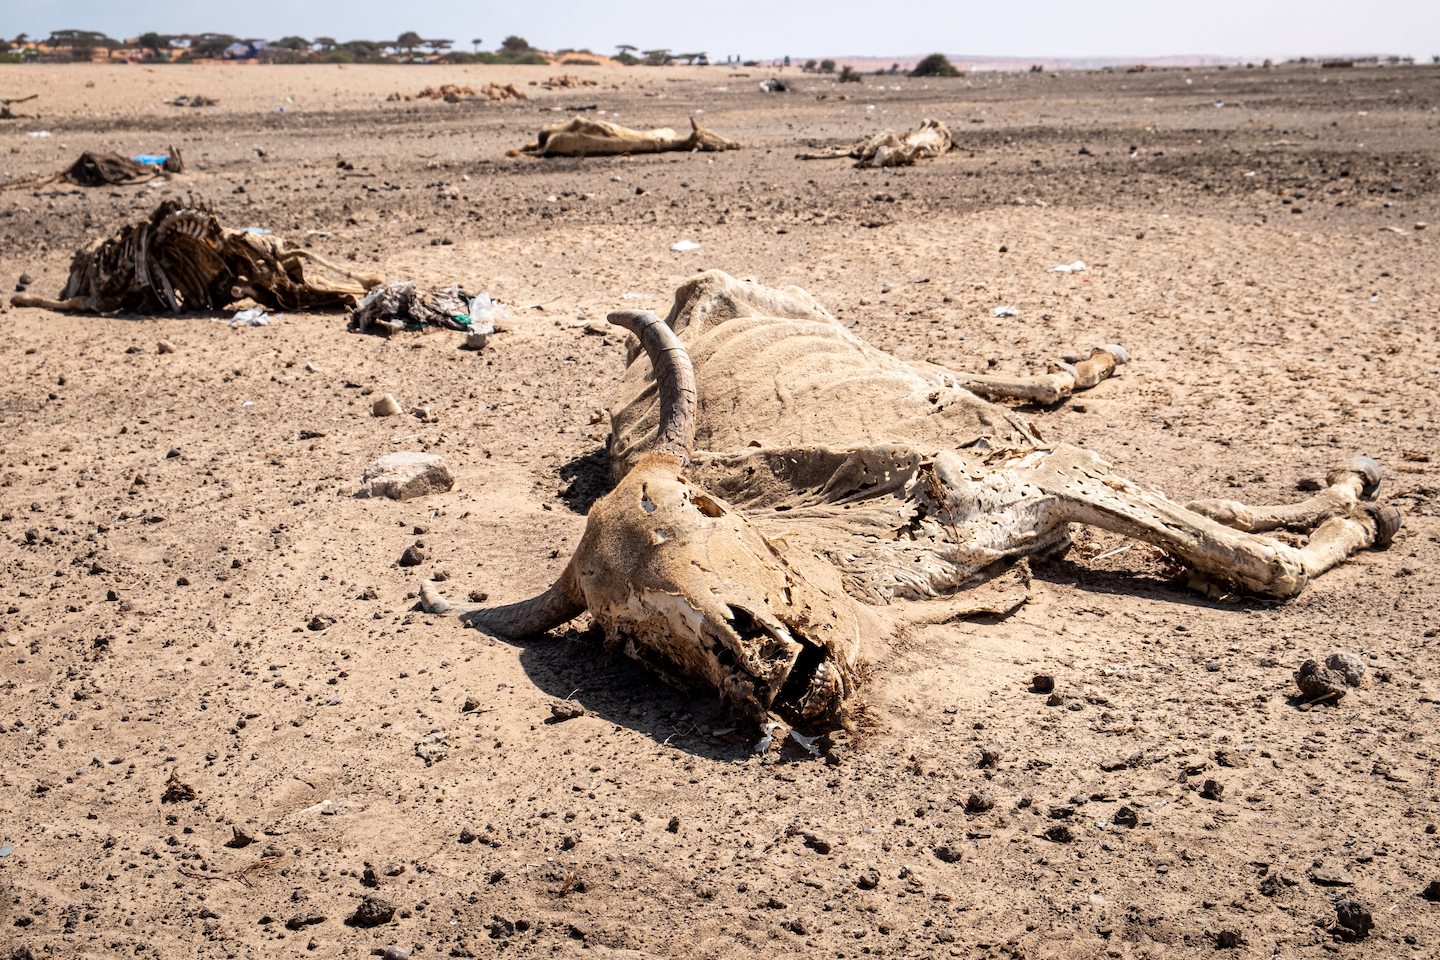 For miles and miles, the side of the road is strewn with animal carcasses. Goats, cows, camels and donkeys die en masse due to the lack of water  and food. This is a disaster for pastoral communities, that make up around 60 per cent of the Somali population, as they rely on their livestock to  generate income and food.